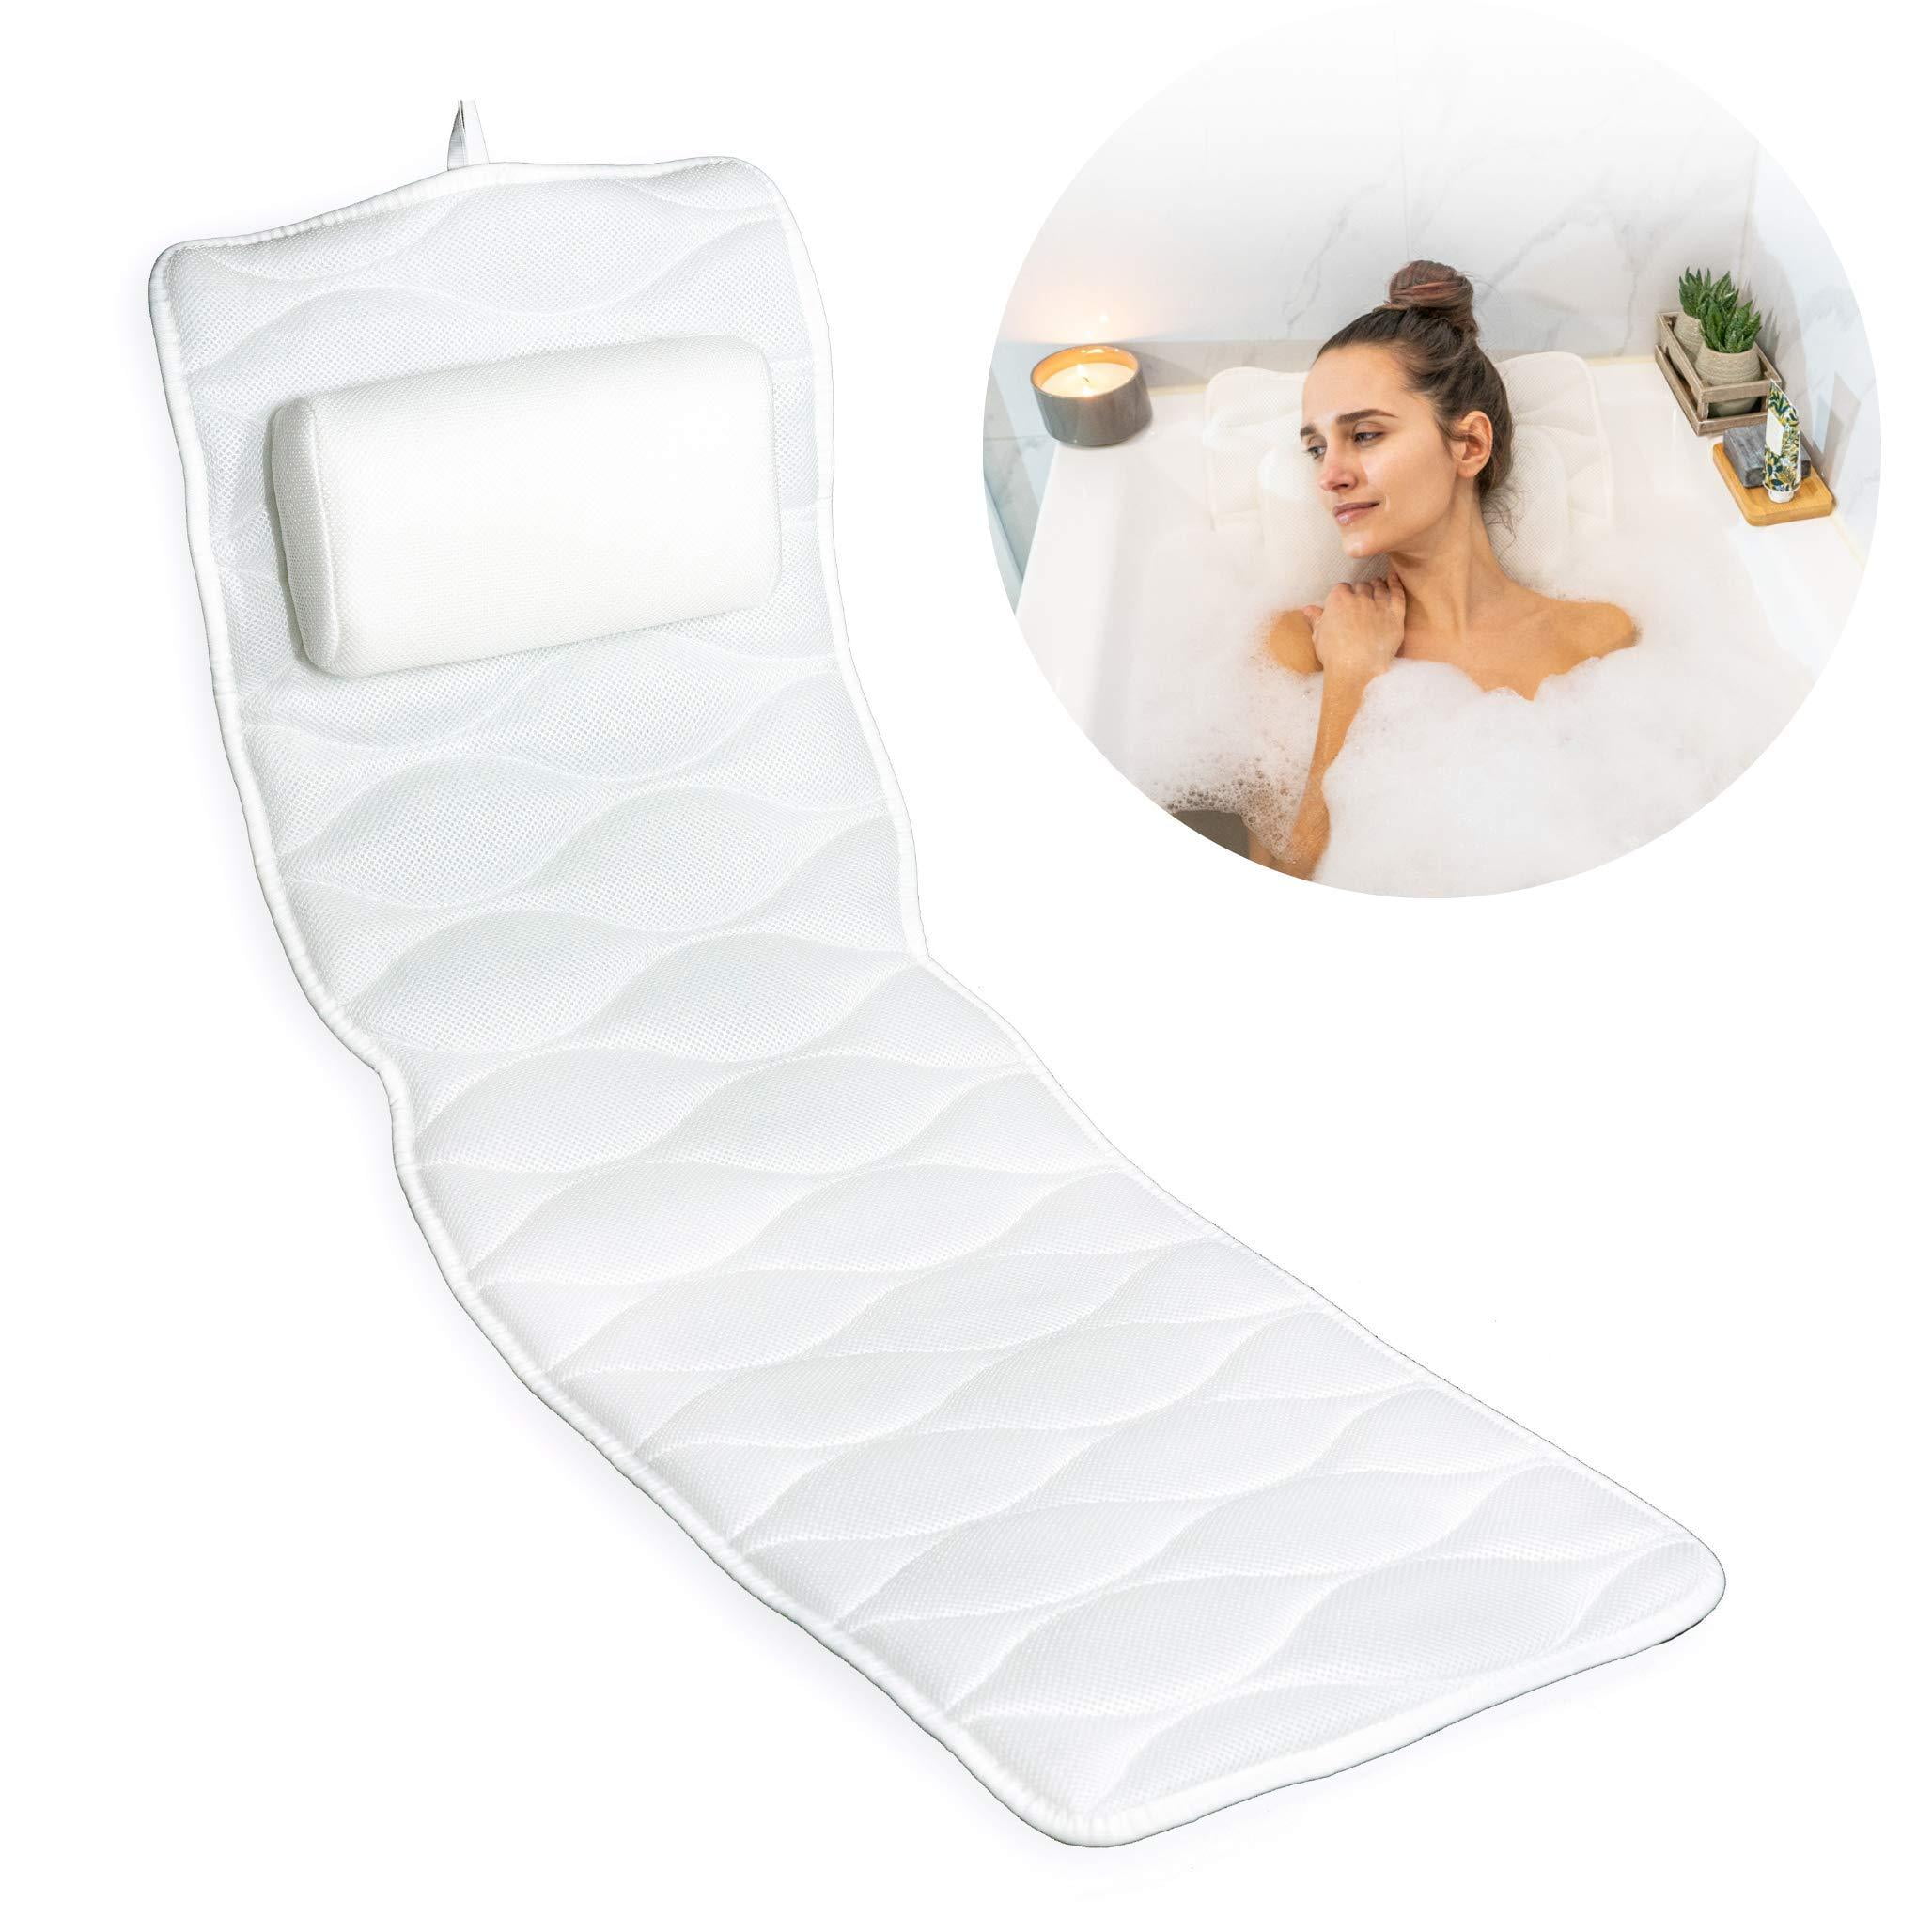 Bath Pillow and Bathtub Tray for Tub: Pamper Yourself to a Luxurious  at-Home Spa Experience - Bath Accessories Ideal Relaxation Gifts for Mom,  Self